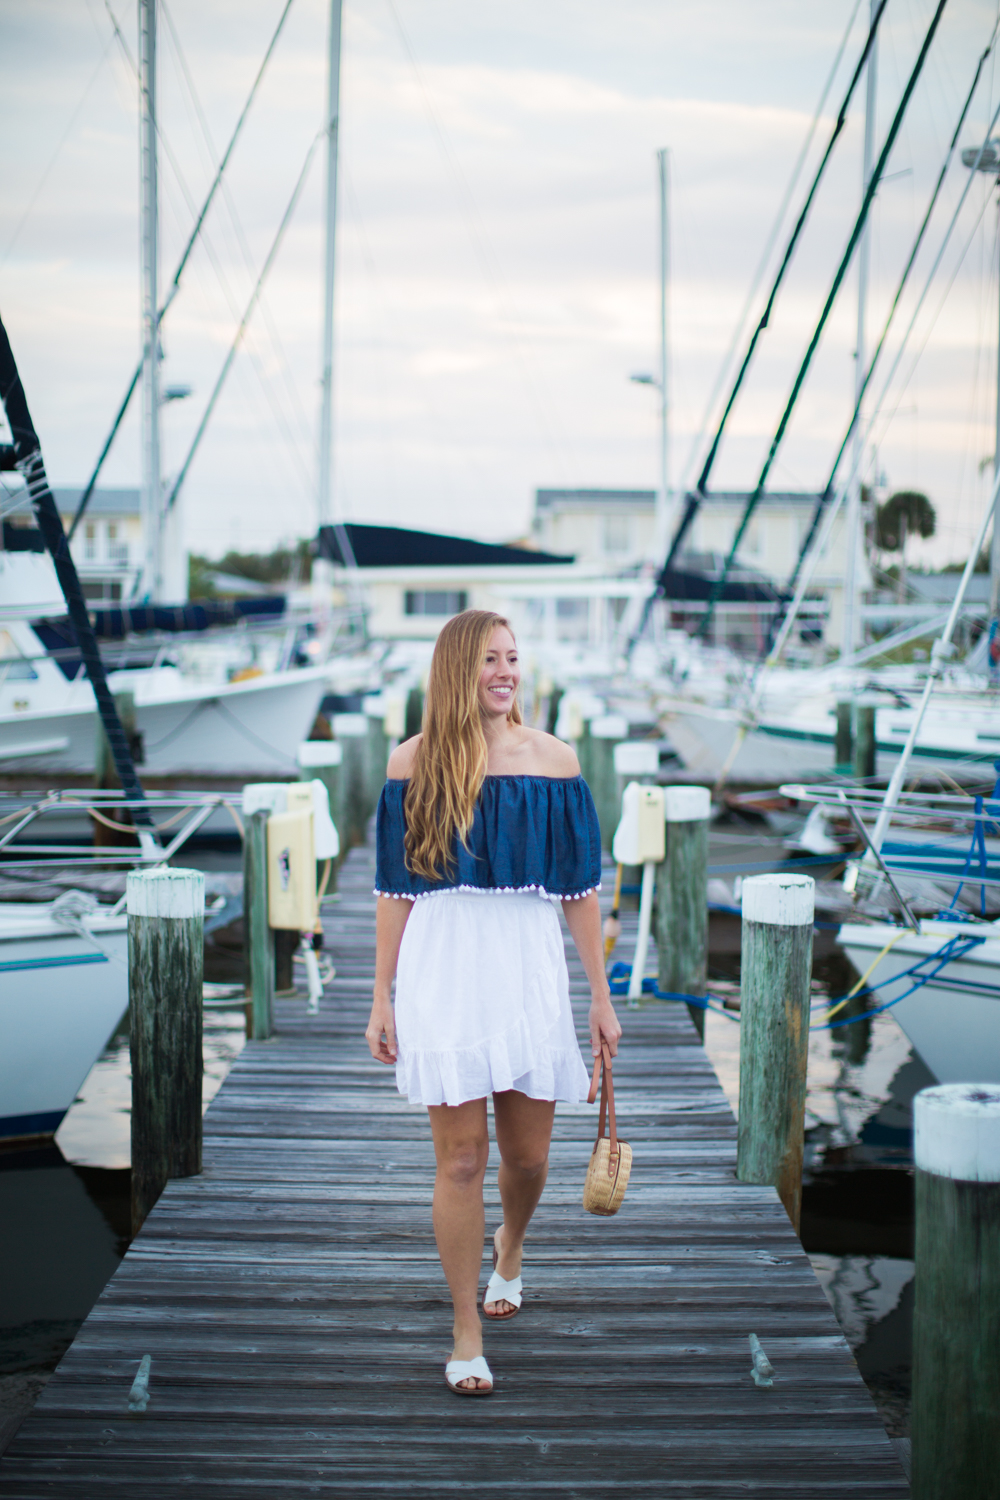 What to Wear on a Summer Beach Vacation | Summer Beach Outfit Idea | Beach Vacation Outfit | Cruisewear | What to Pack for your Summer Beach Vacation | Beachwear for Women - A Nautical Inspired Summer Beach Outfit by Katie McCarty of Sunshine Style